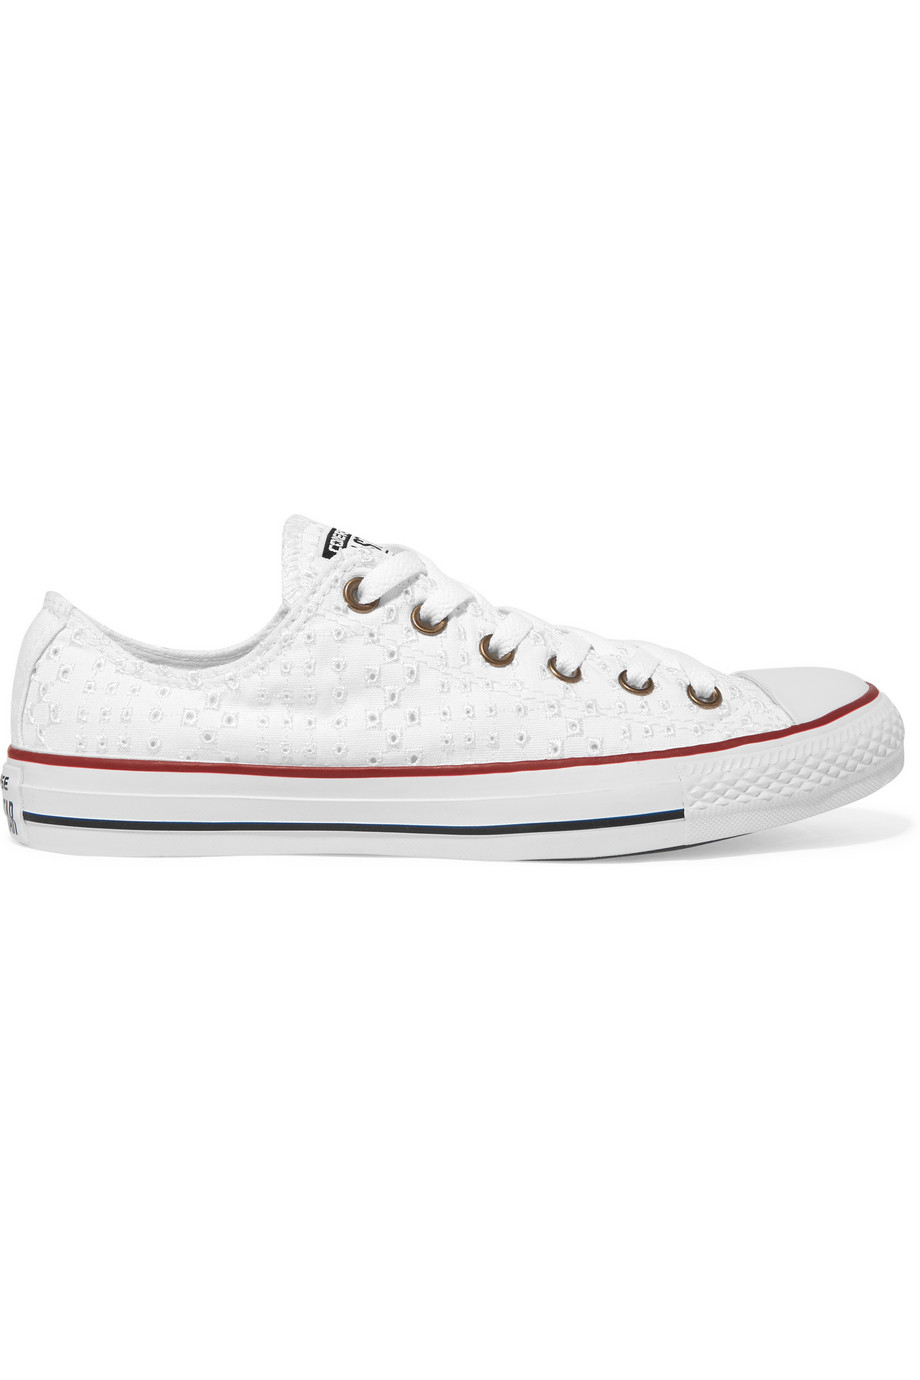 Converse Chuck Taylor Broderie Anglaise Sneakers in White | Lyst Canada